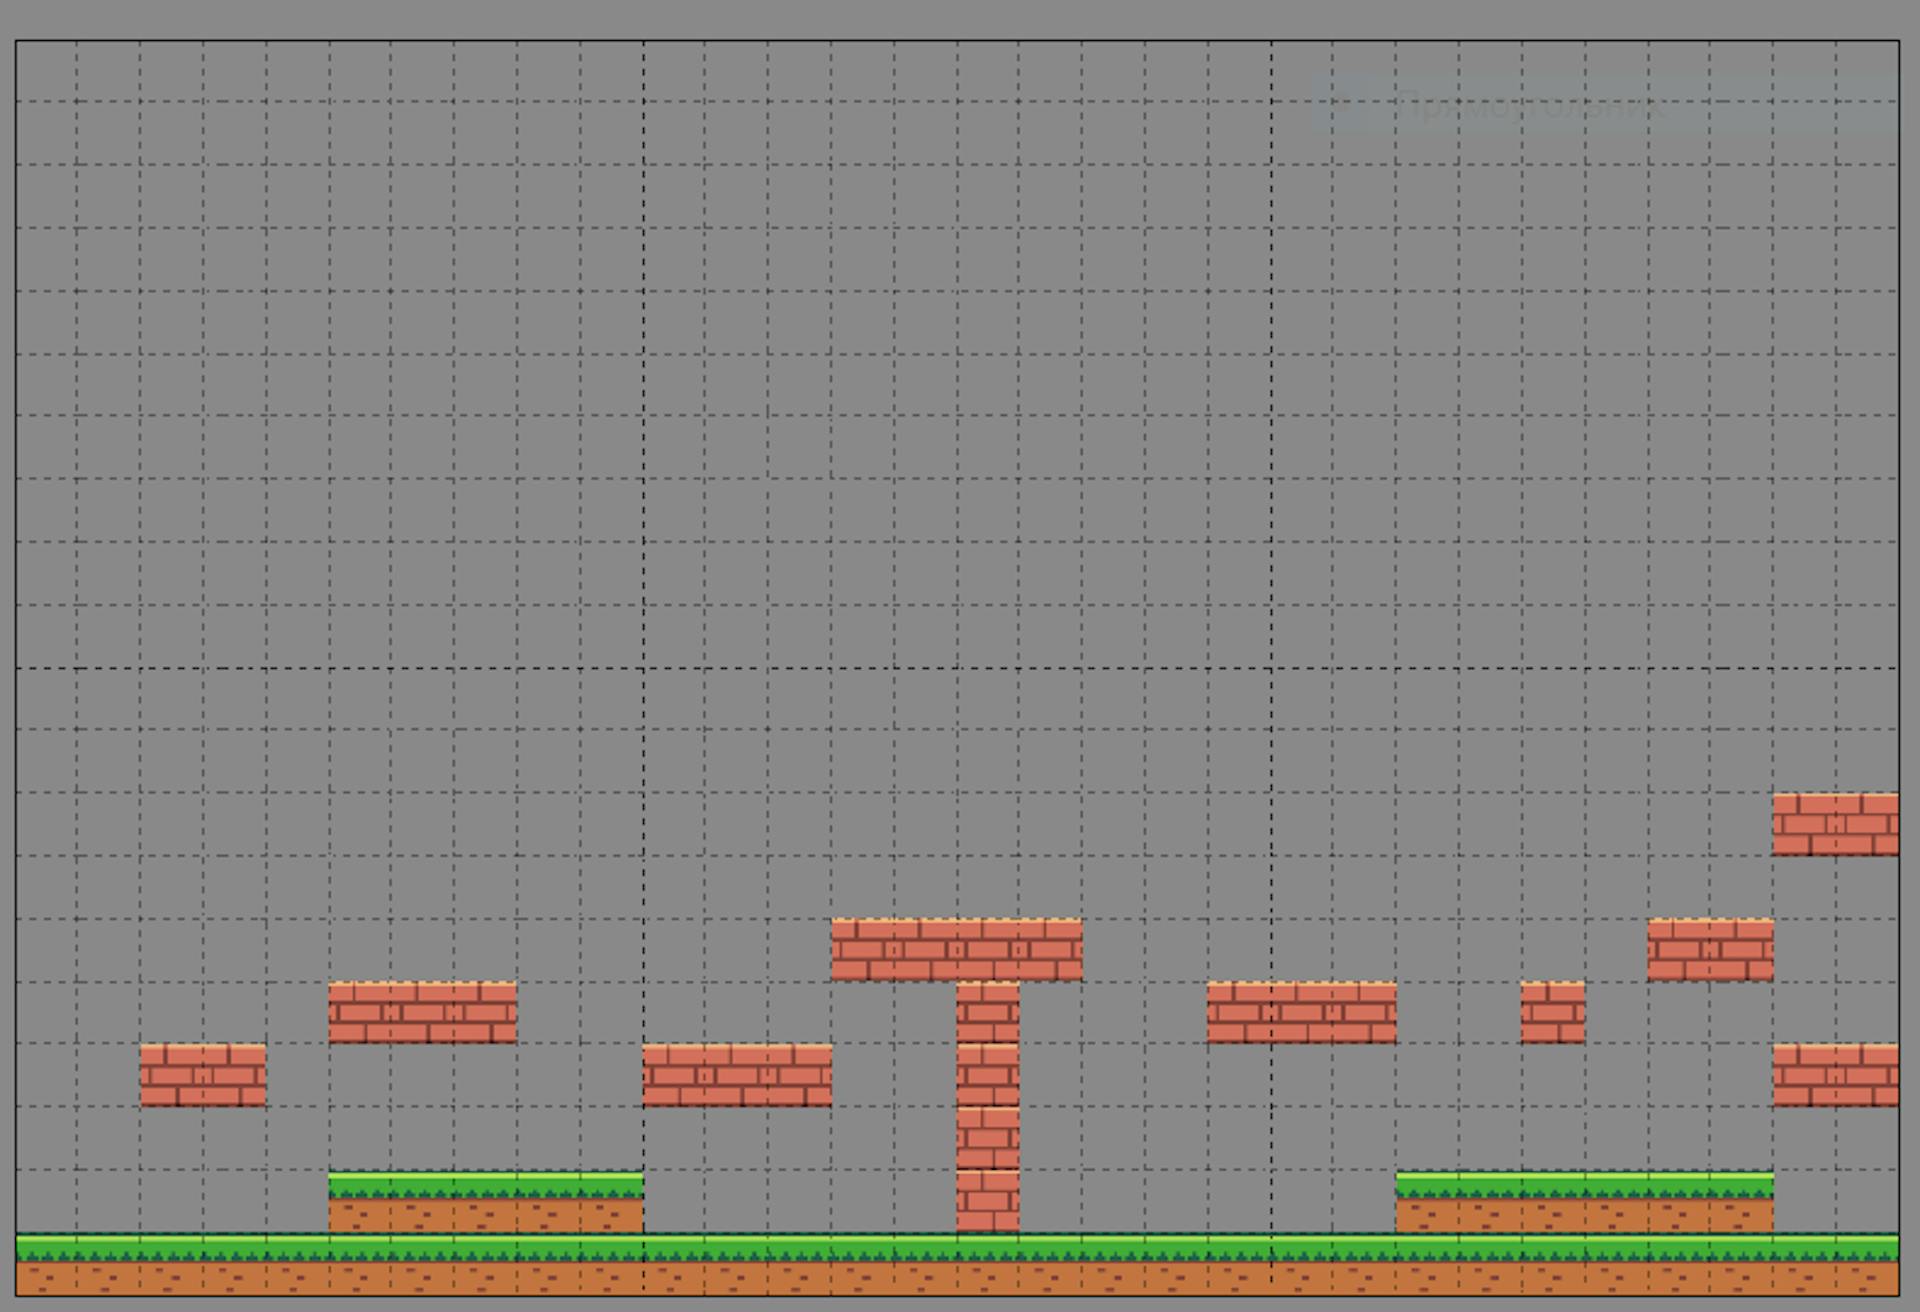 Game level in Tiled editor UI